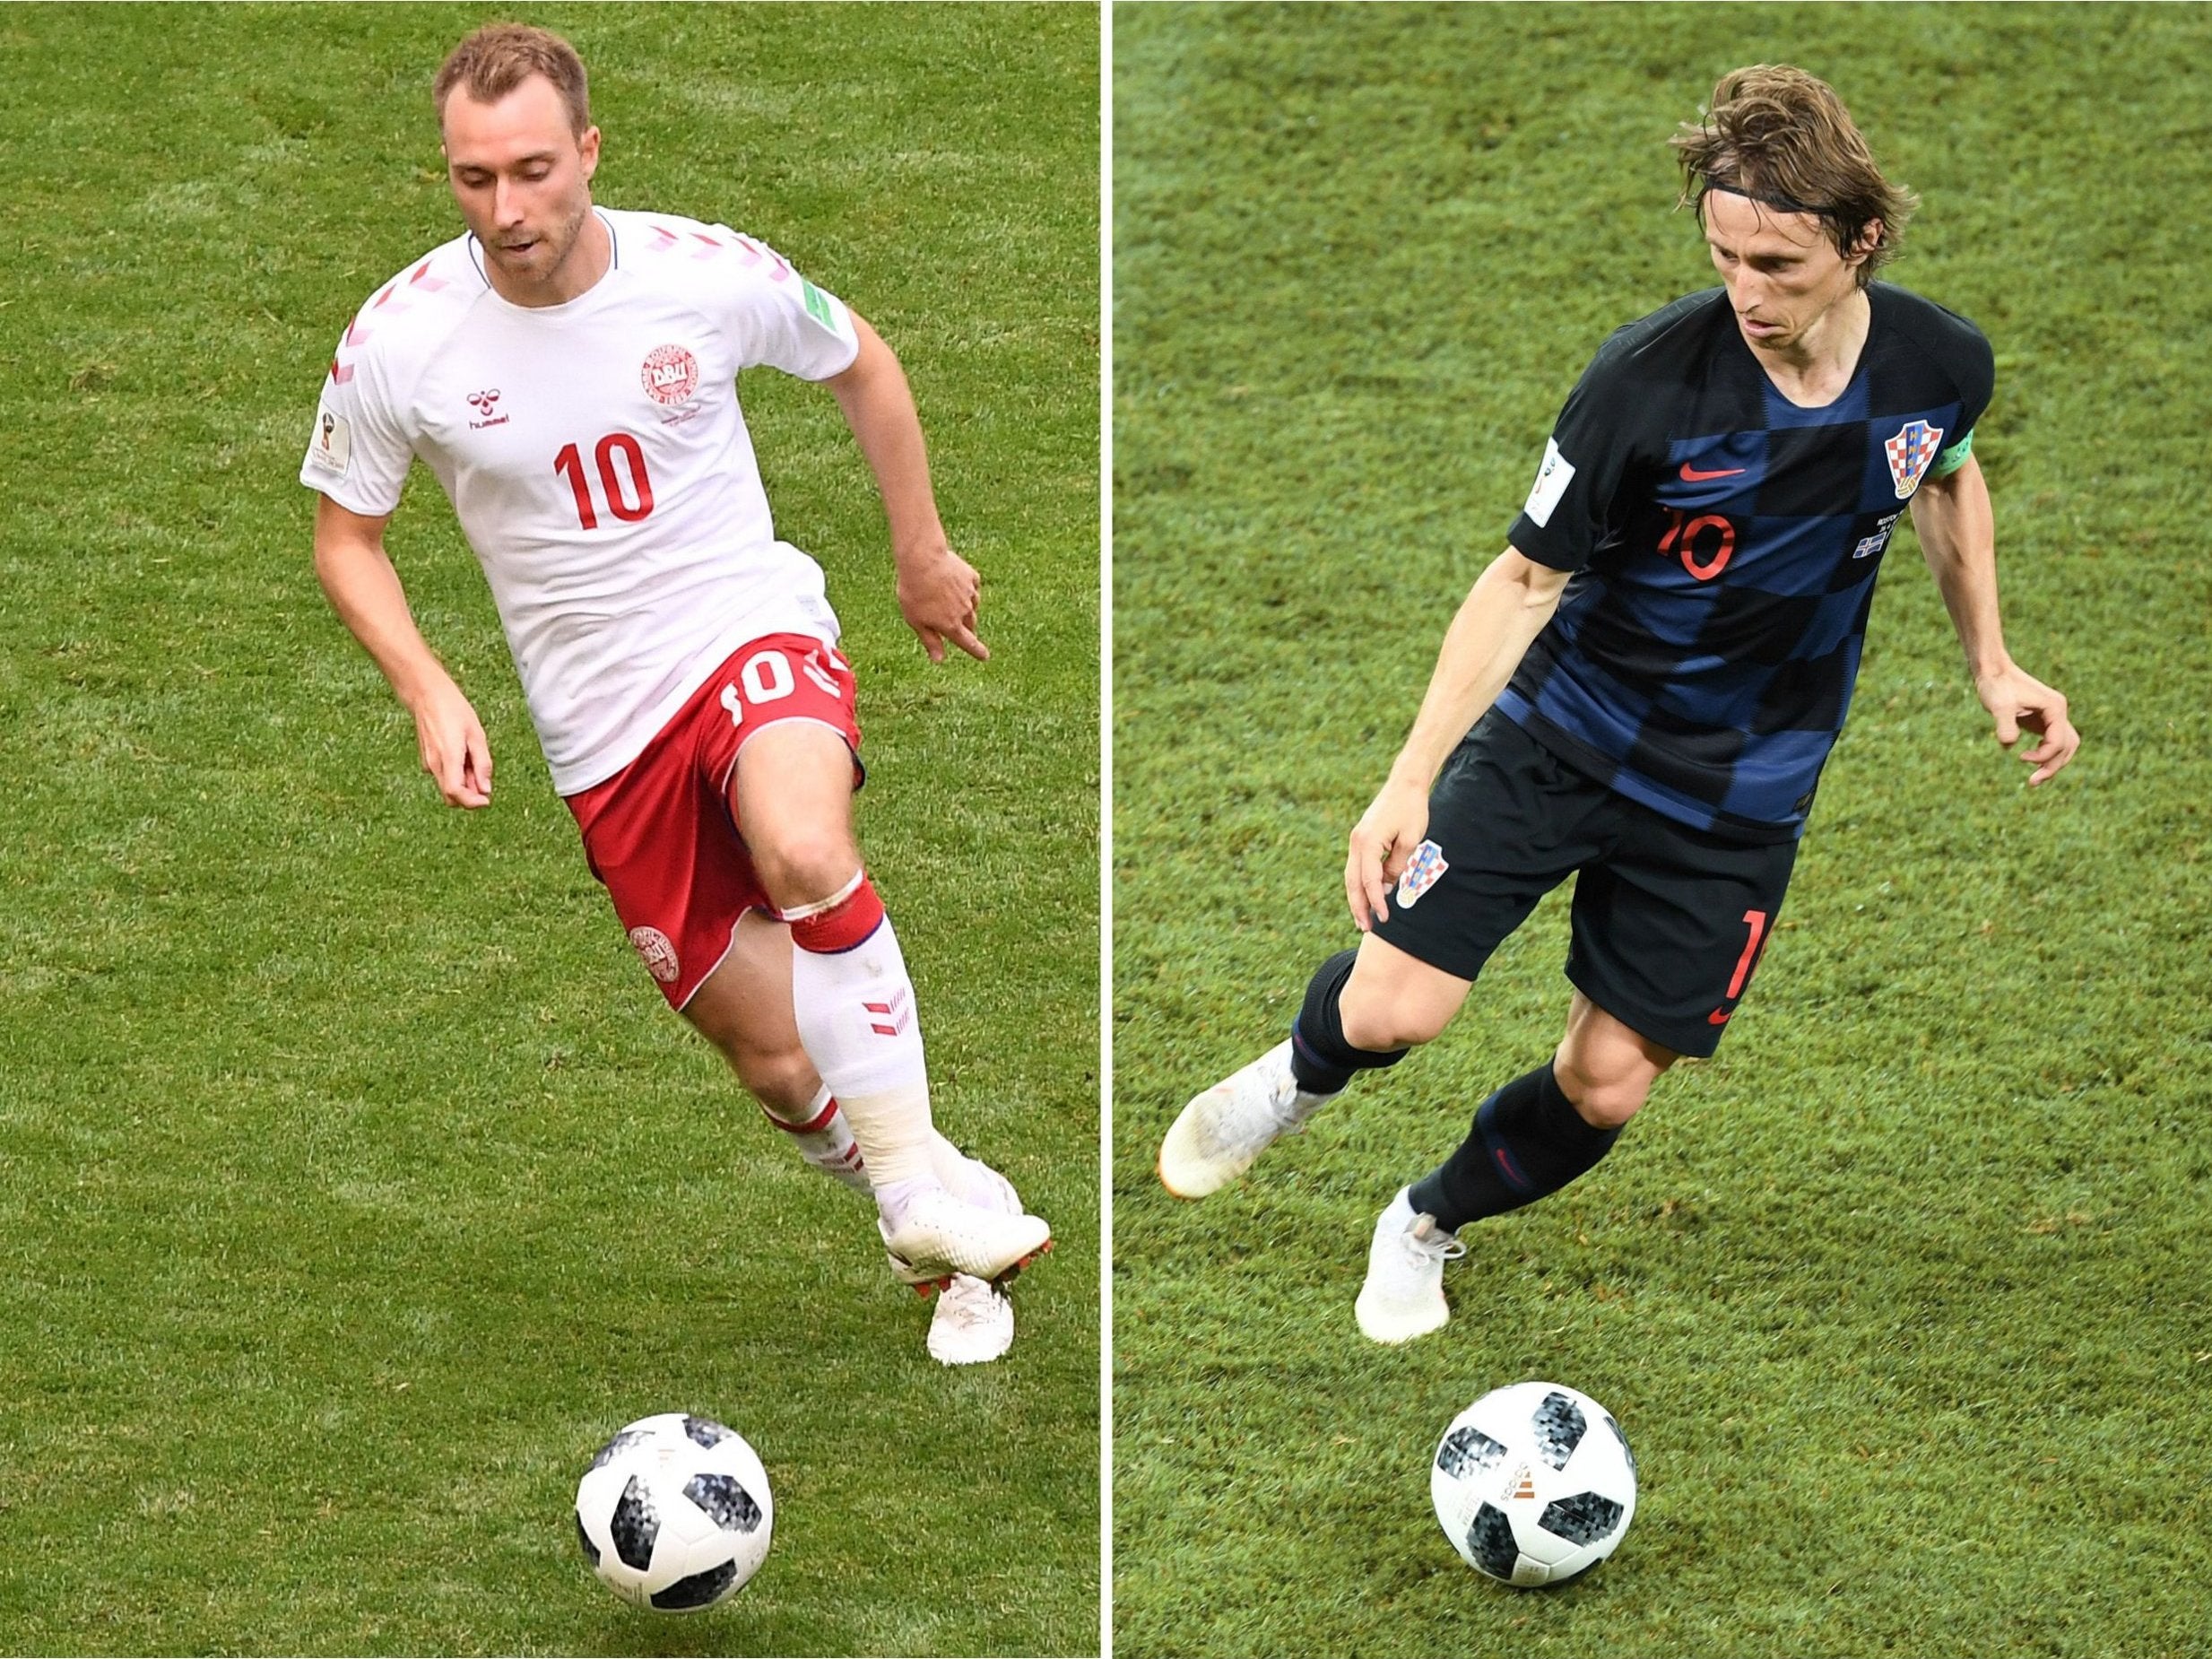 Croatia vs Denmark LIVE World Cup 2018: Prediction, how to watch online, what time does it start, which TV channel, team news, line-ups, betting odds